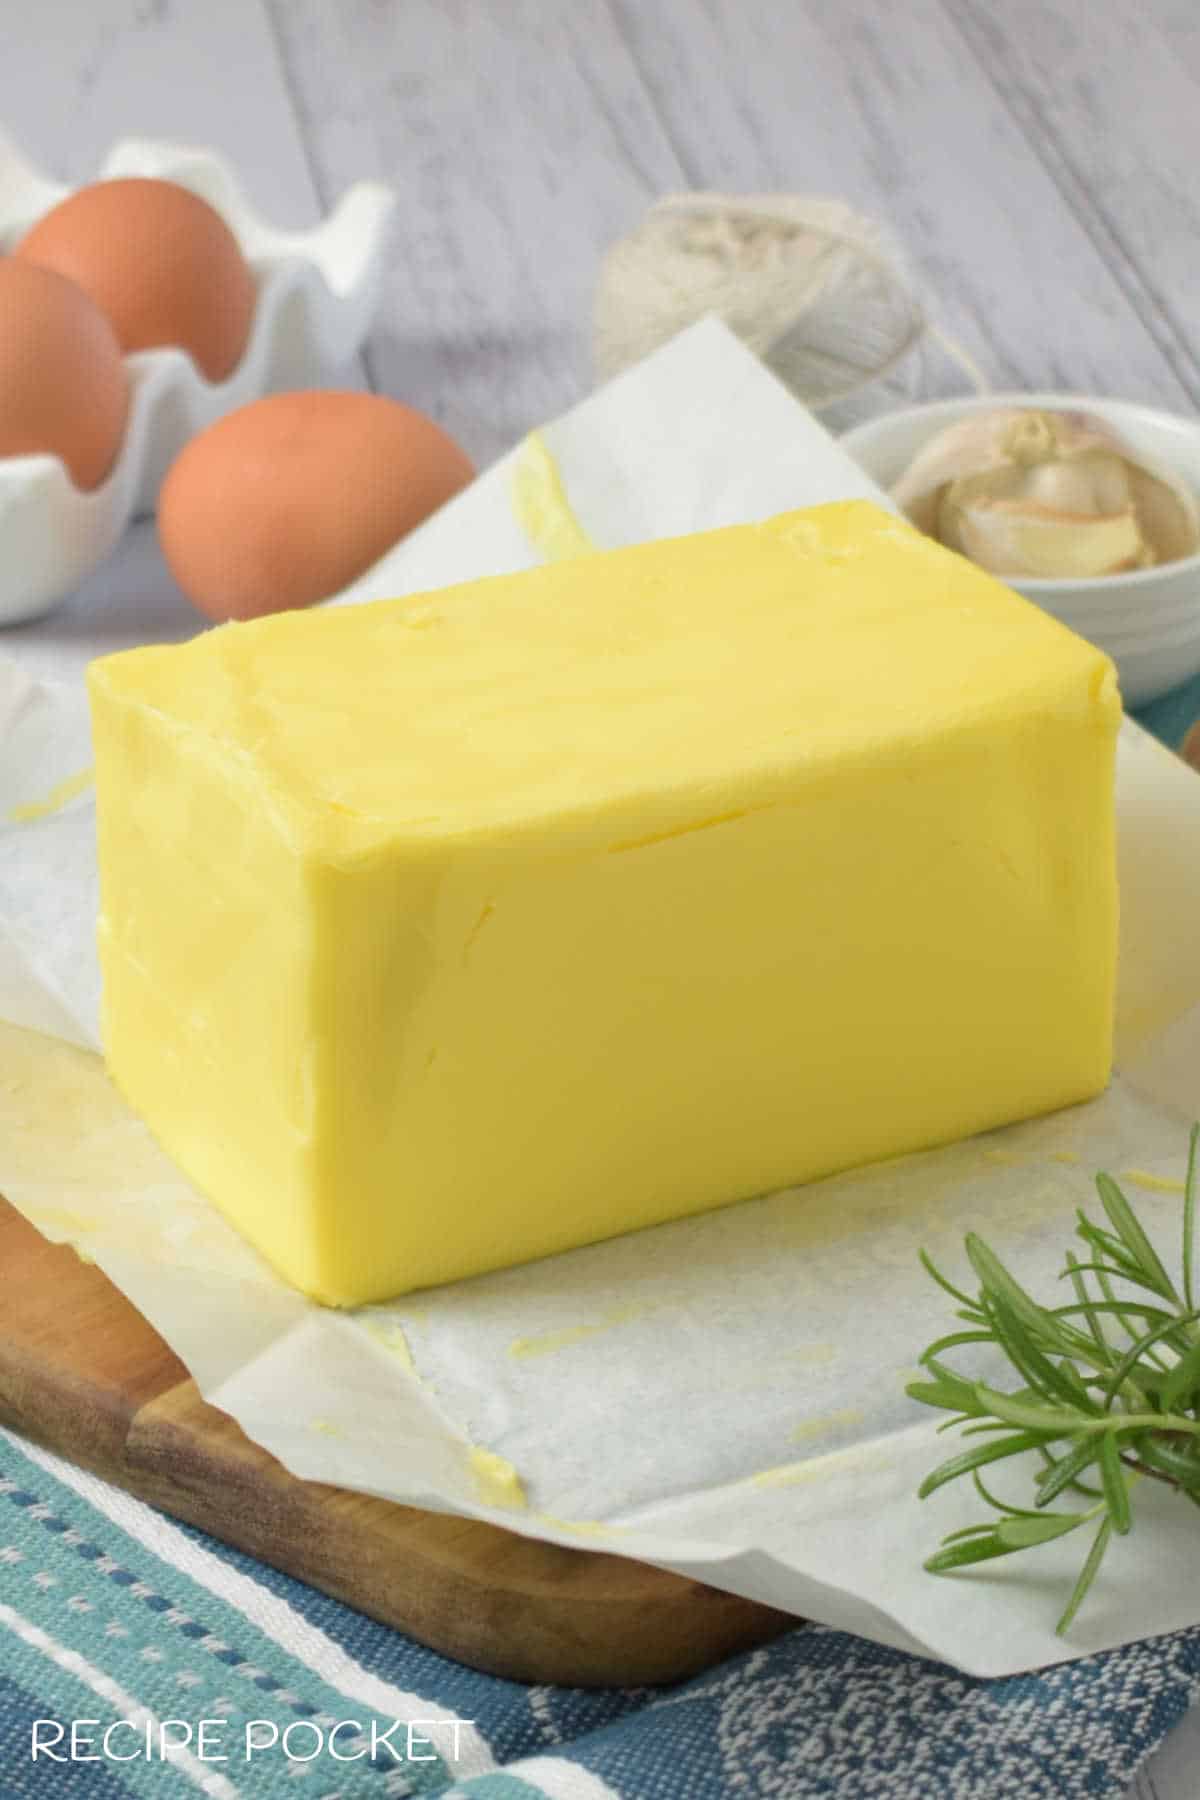 Hero image for article on How to Soften Butter.